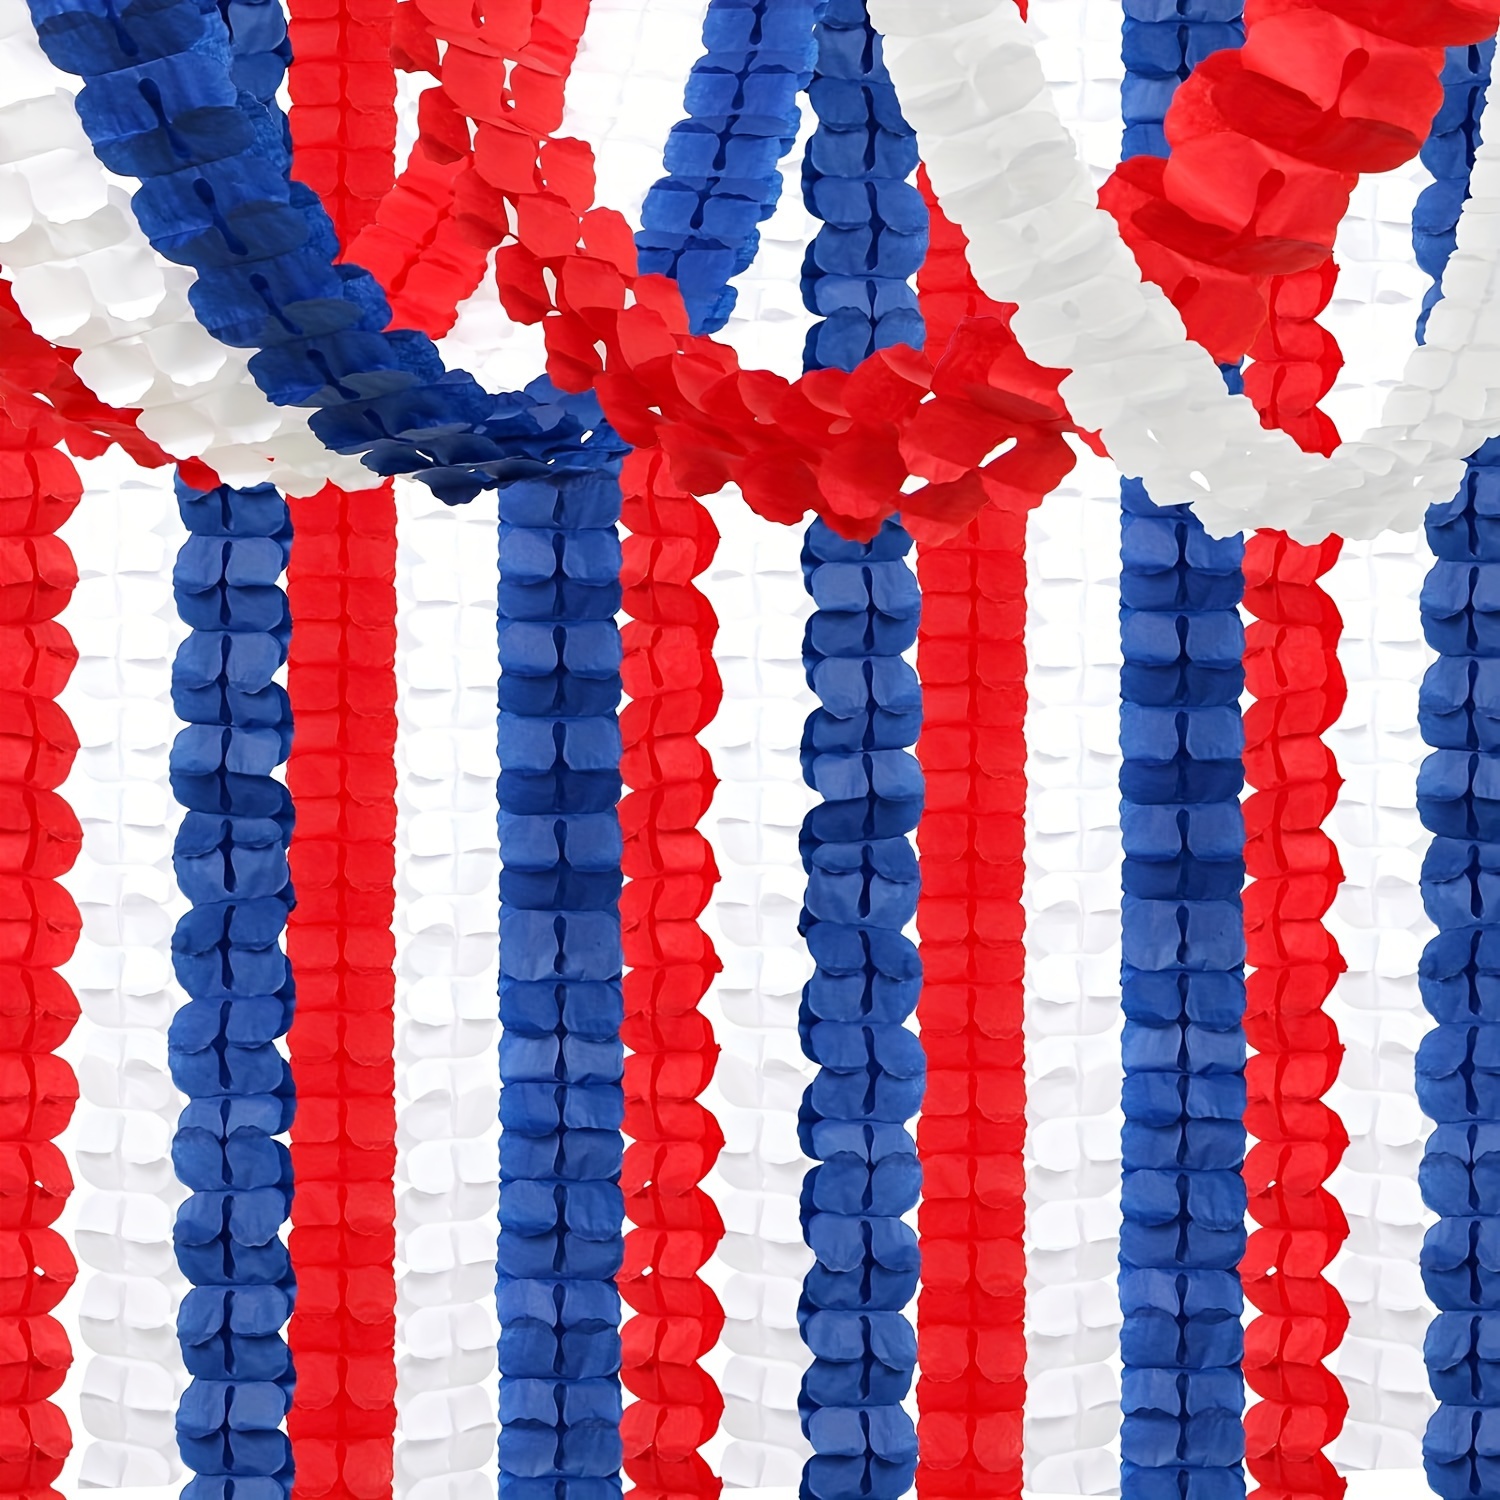 

patriotic Pride" 4th Of July Patriotic Party Decor Set - 3-piece, 157ft Red White & Blue Streamer Garland With Clover Banner For Independence Day Celebration